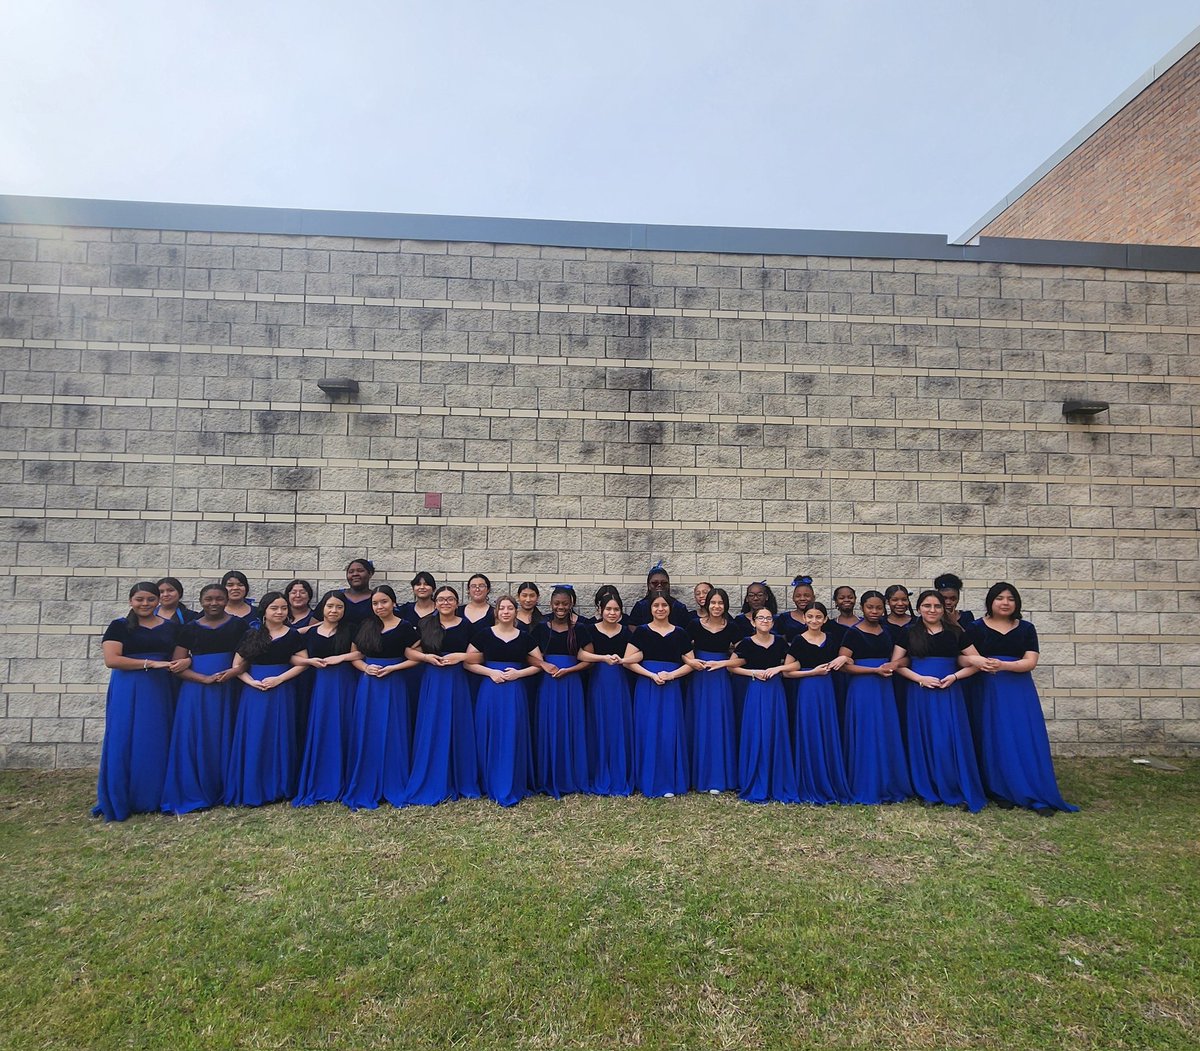 Congrats to our Non-Varsity Treble Choir for an Excellent (2) performance on stage & all 1s in sight-reading  at UIL Concert & Sight-Reading Contest today 🎶🎶 #plummerchoir @PlummerMS_AISD @principaldmac @pruittkim @BachPm @aldinefinearts @AldineISD